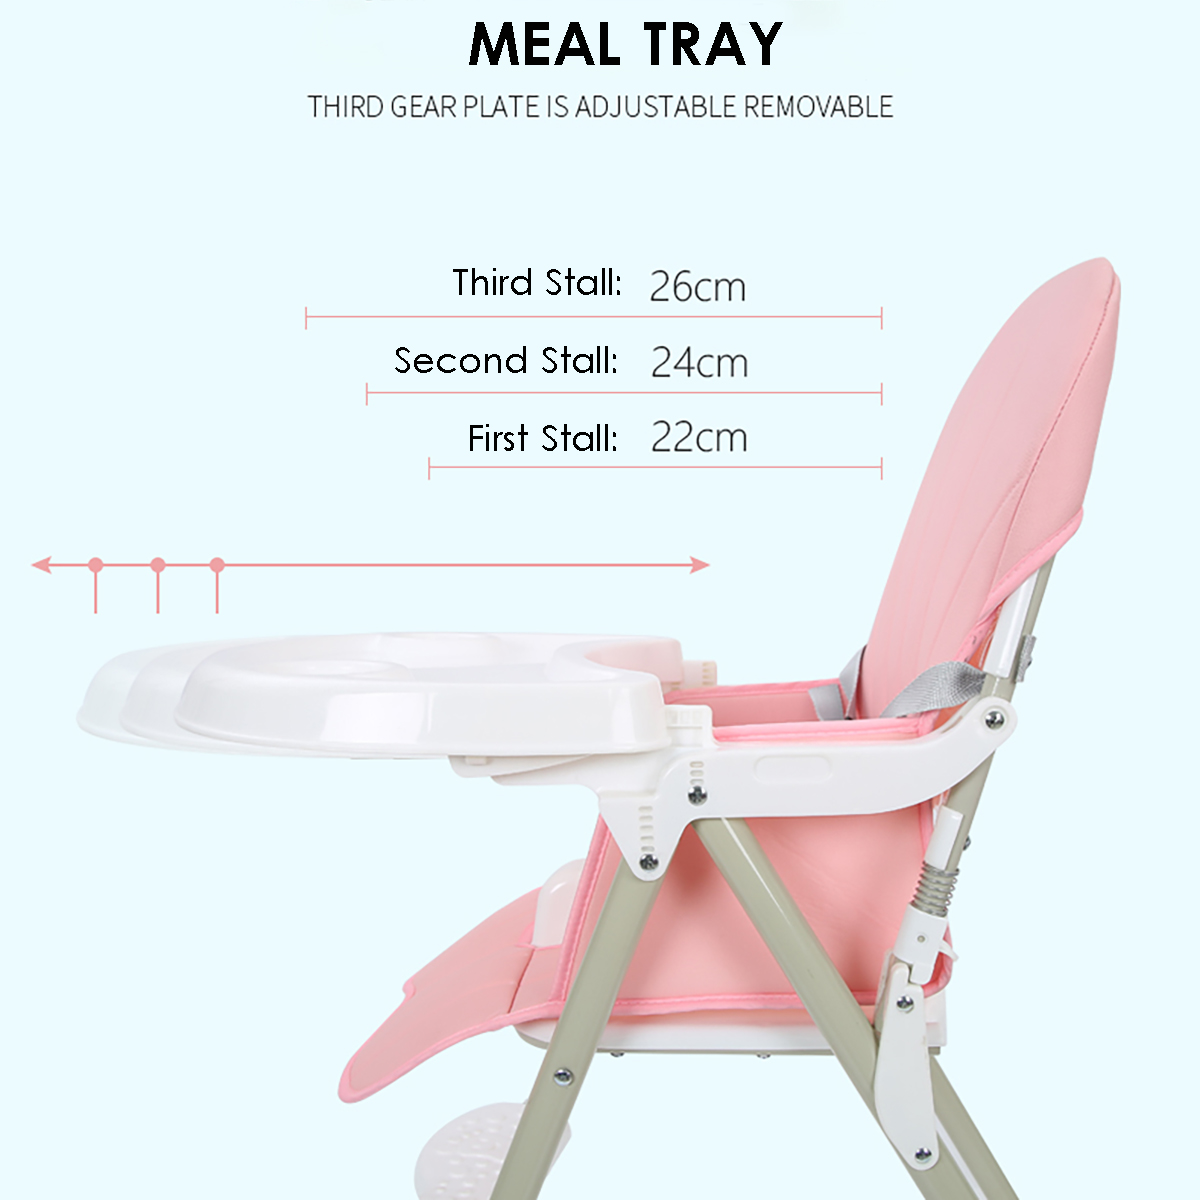 Ditong-Portable-Folding-Baby-High-Chair-Adjustable-Plate-Lockable-Wheels-PU-Seat-with-Environmental--1748389-4